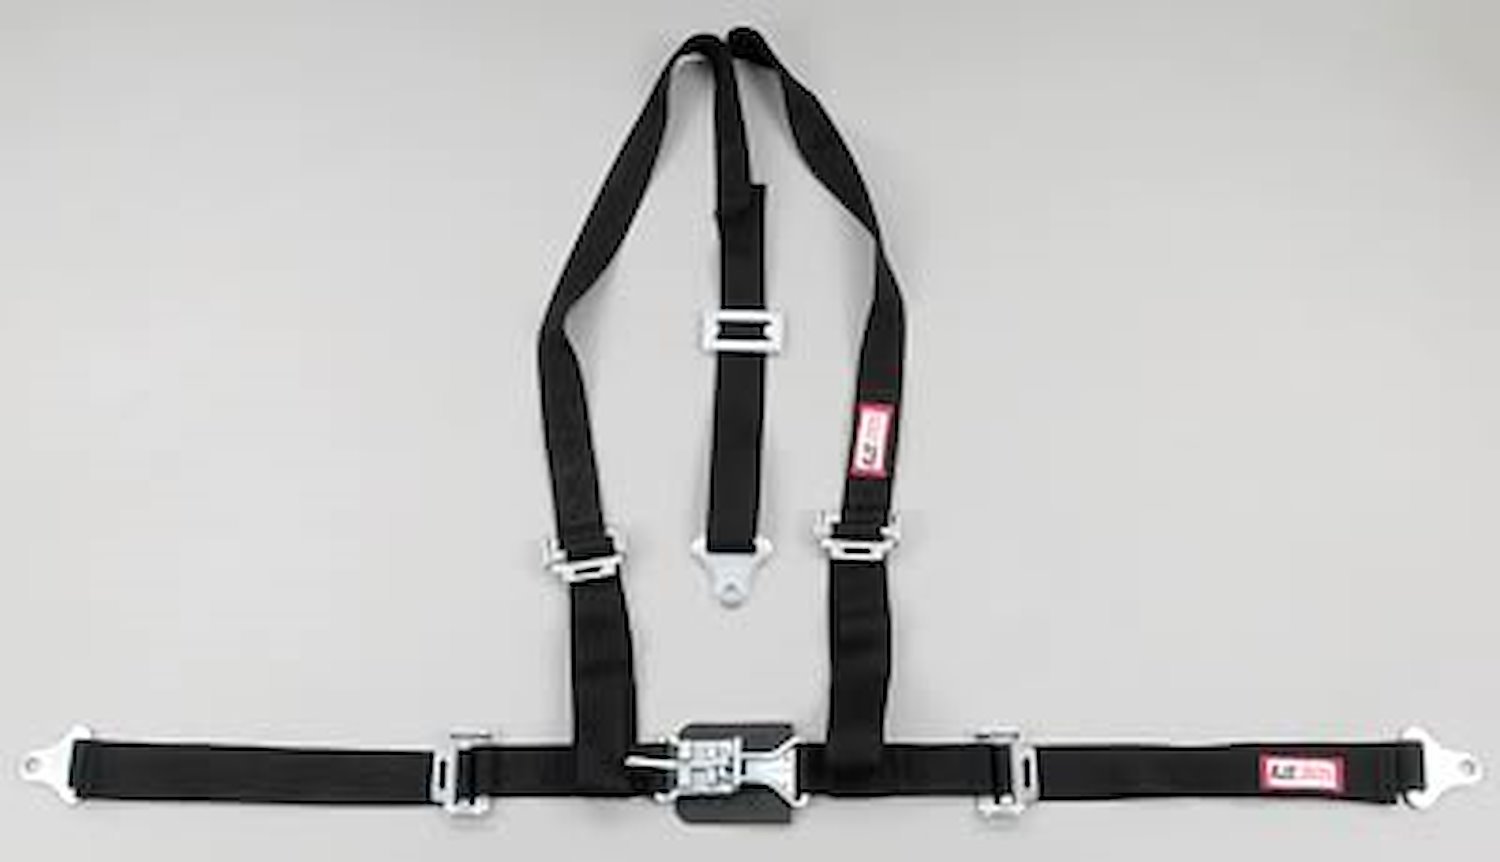 NON-SFI L&L HARNESS 2 PULL DOWN Lap Belt SEWN IN 2 S.H. INDIVIDUAL FLOOR Mount w/STERNUM STRAP ALL WRAP ENDS BLUE